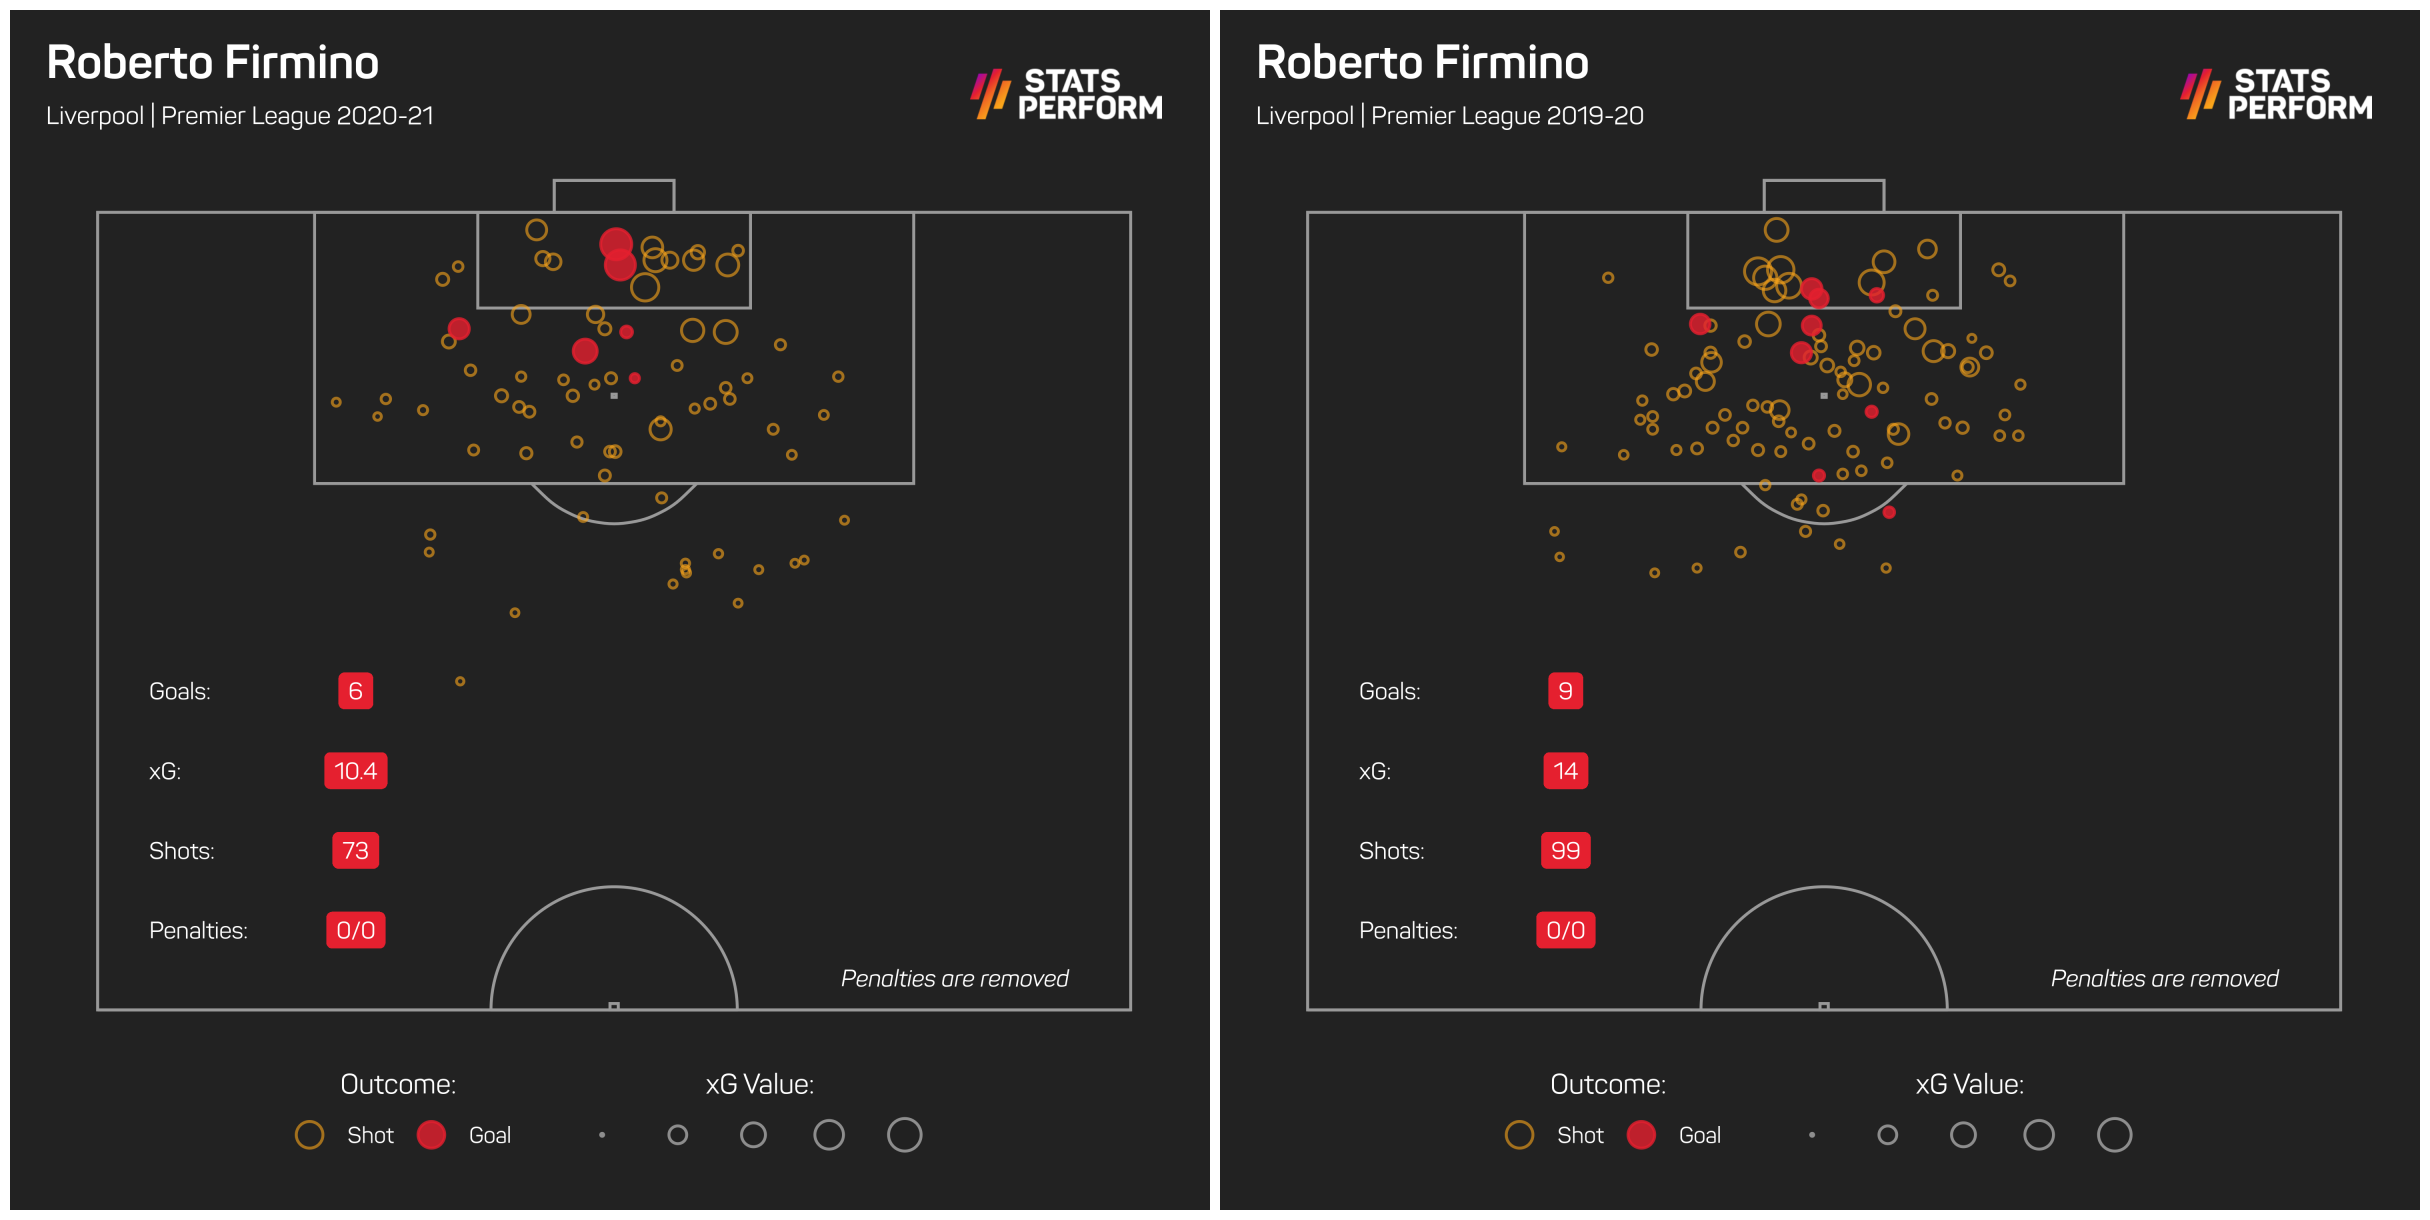 Roberto Firmino is under-performing his xG, again